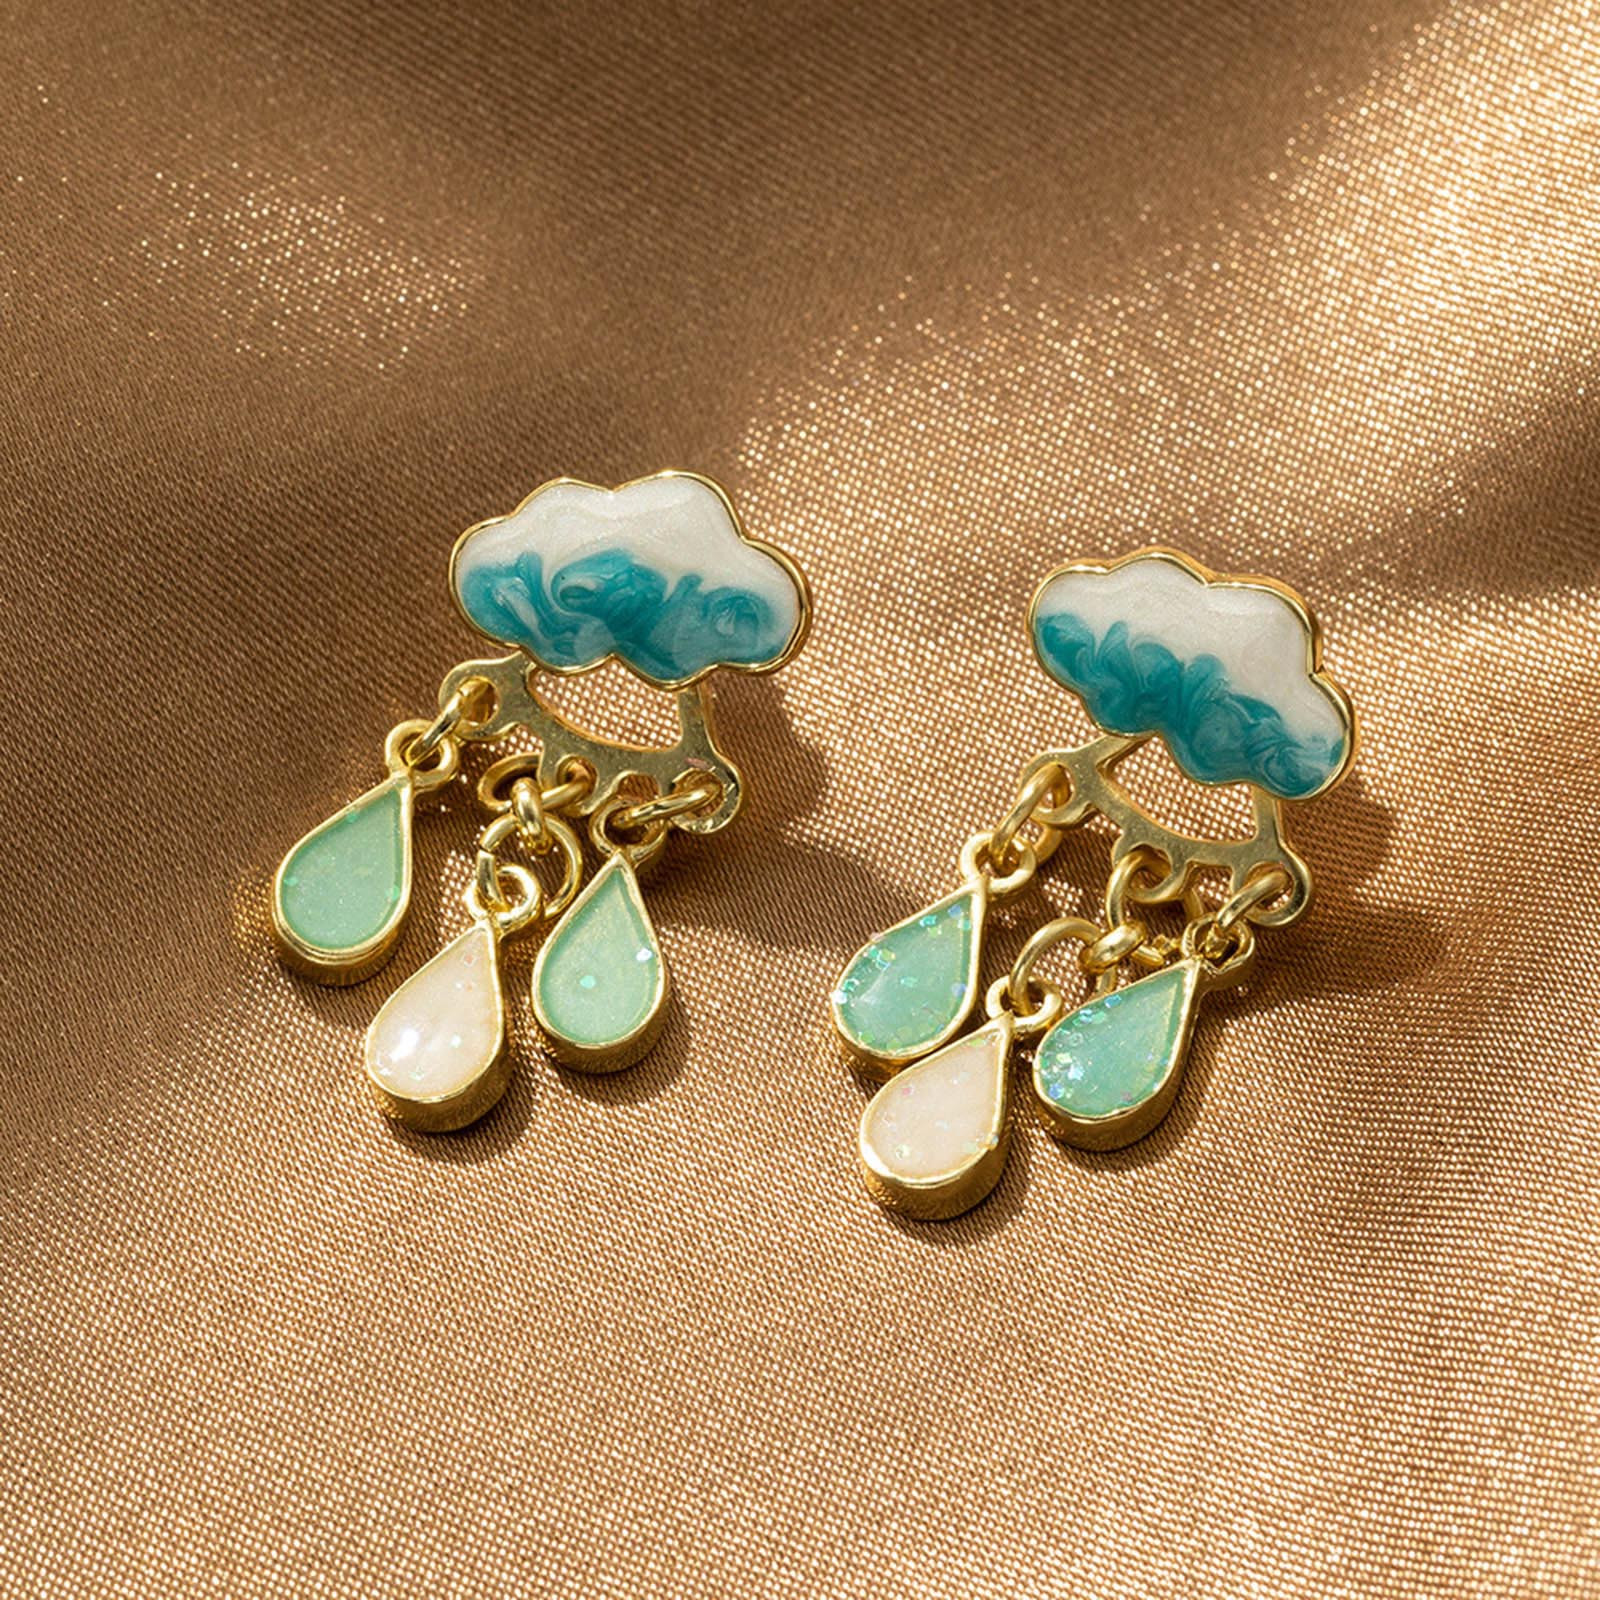 Kayannuo Christmas Clearance Rainy Day Cloud Earrings Cloud Rain Earrings Stud Earrings Advanced Cute Fresh Water Drop Earrings Jewelry Gifts For Women - image 3 of 6